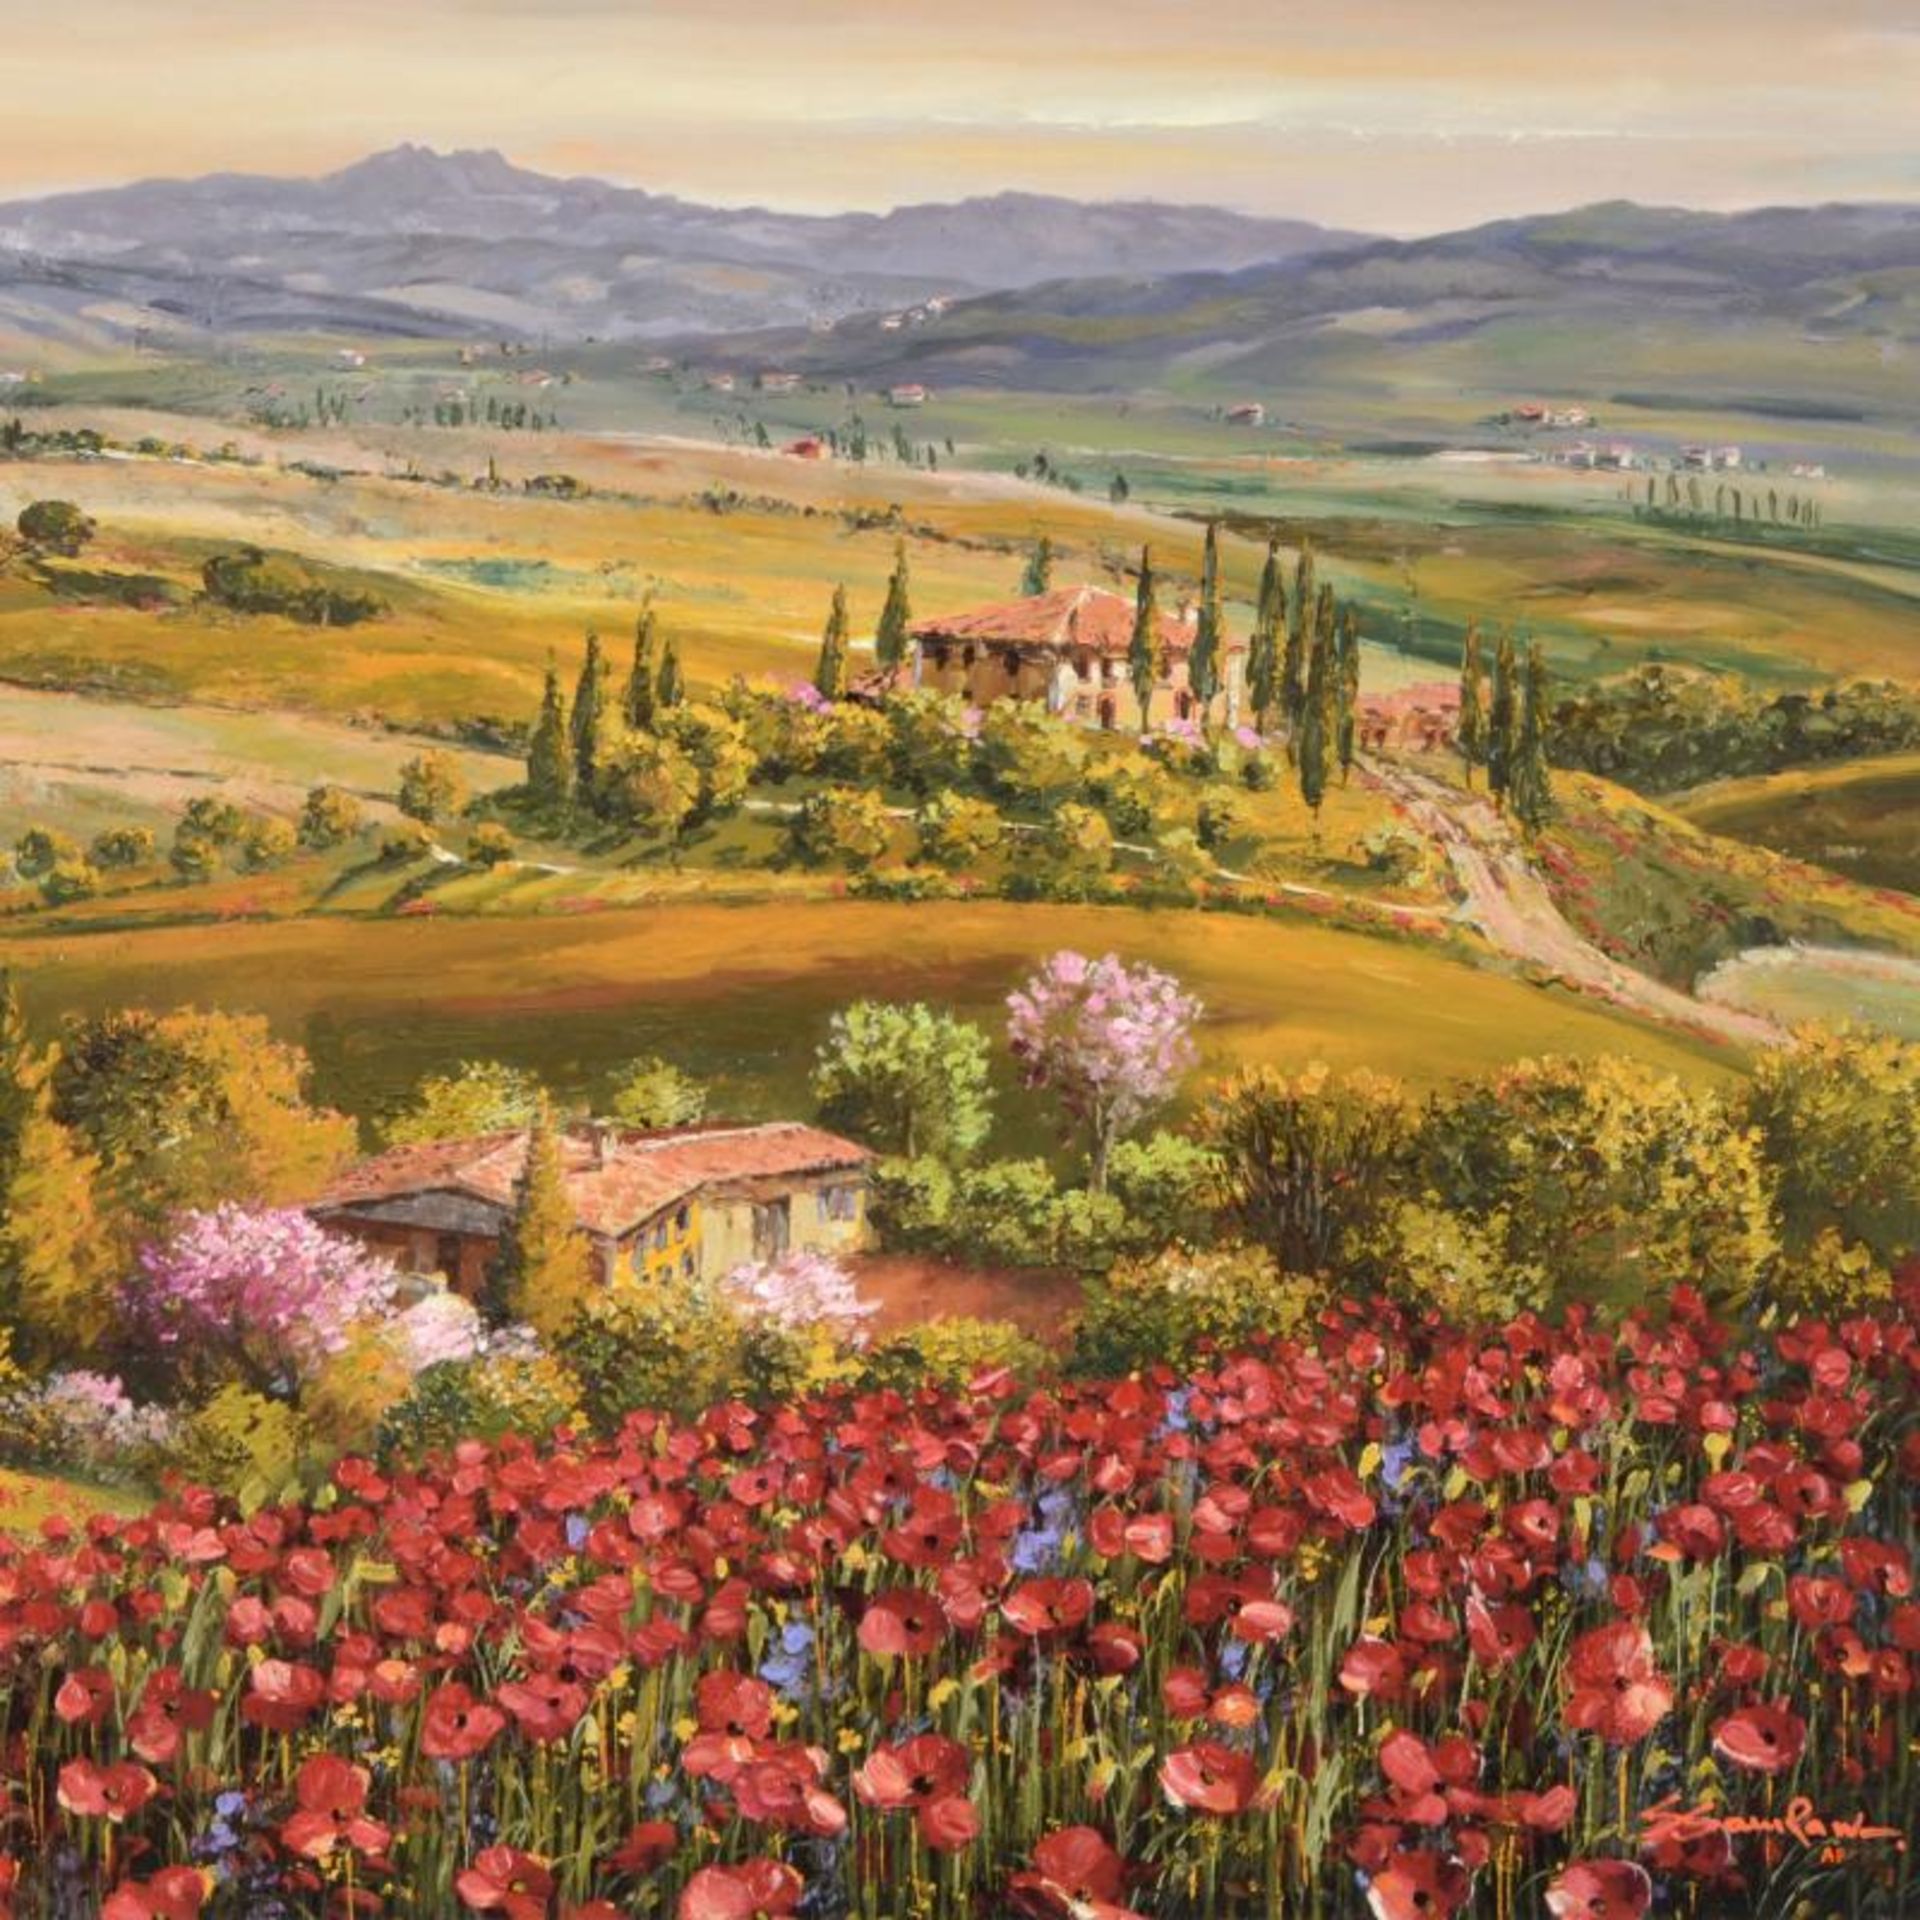 Sam Park, "Tuscany Red Poppies" Hand Embellished Limited Edition Serigraph on Ca - Image 2 of 2